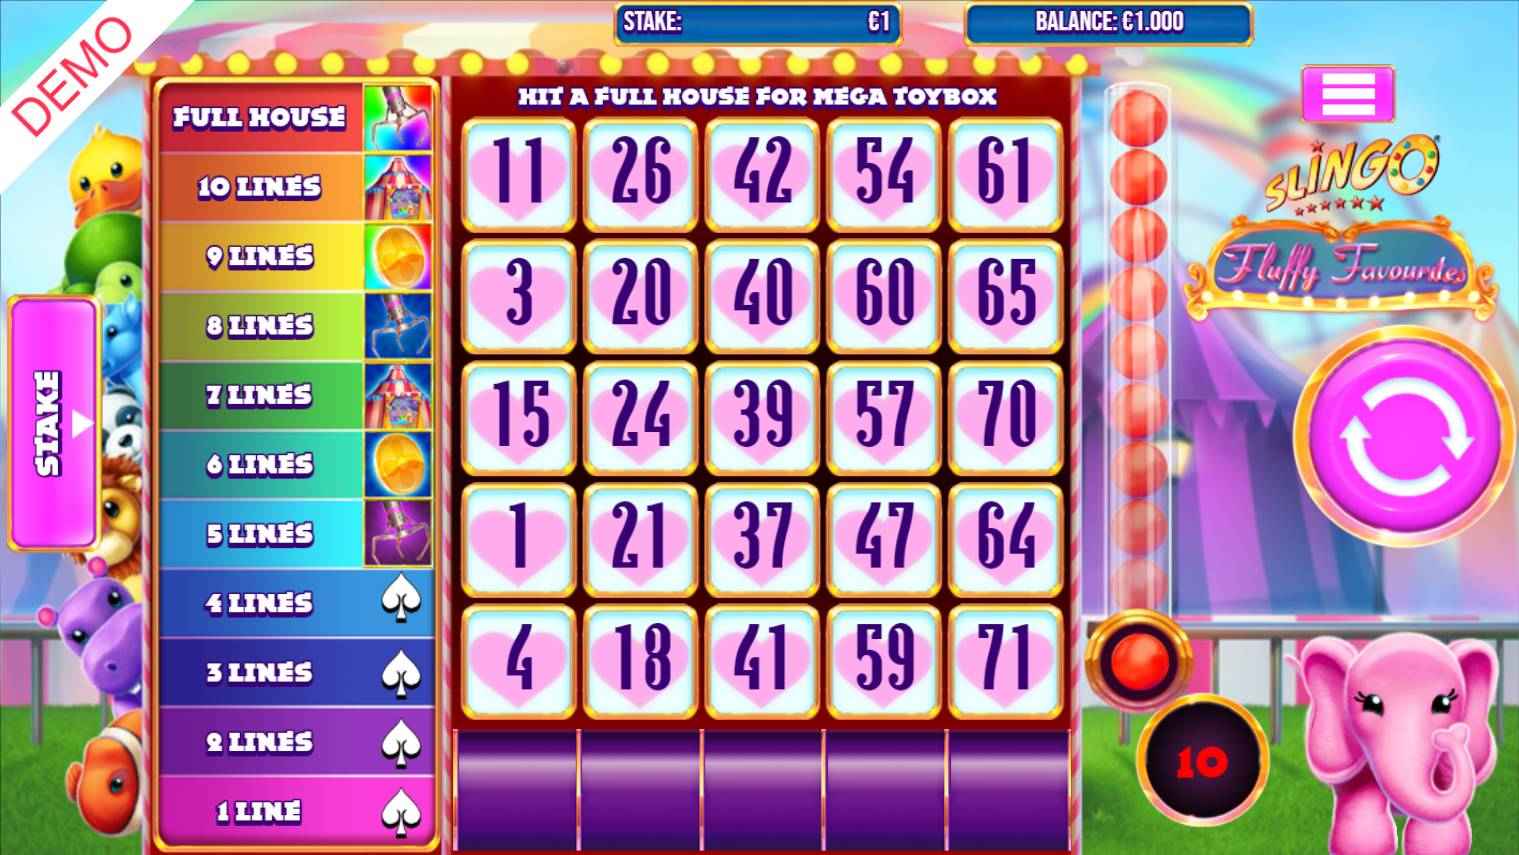 A screenshot of the grid in Slingo Fluffy Favorites. The game is set against a carnival background. The grid is in the center of the screen and has a variety of numbers. The potential bonus games you can unlock are on the left of the grid. Next to the bonus games are a variety of cute stuffed animals, including a fish, hippo, lion, and panda.